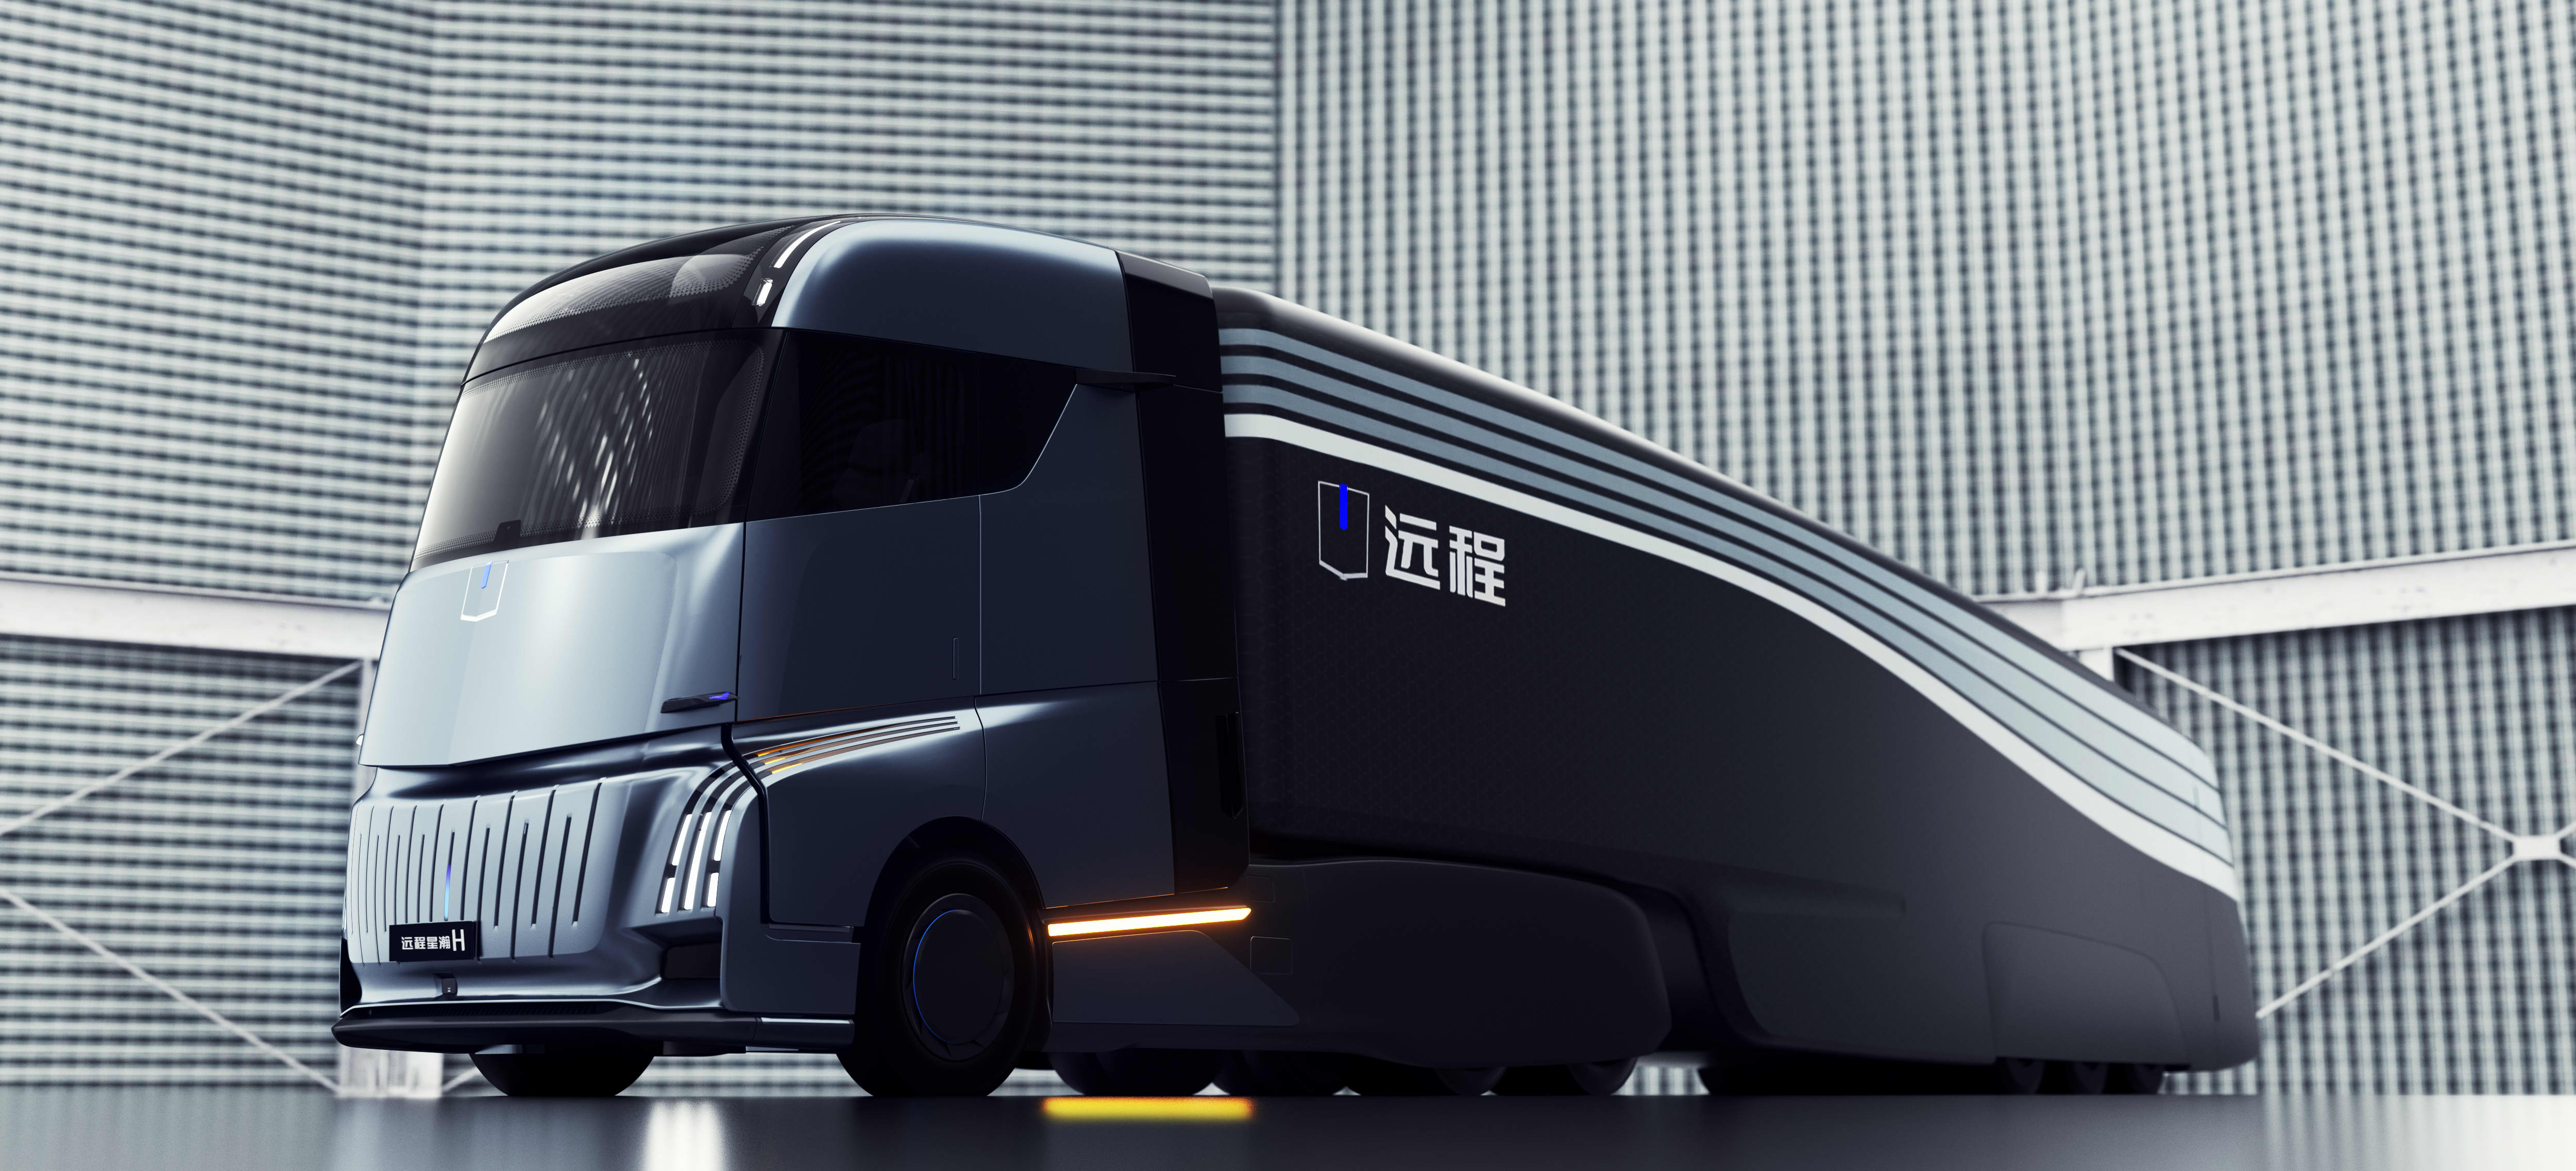 China’s Geely launches electric truck, its rival to Tesla’s Semi